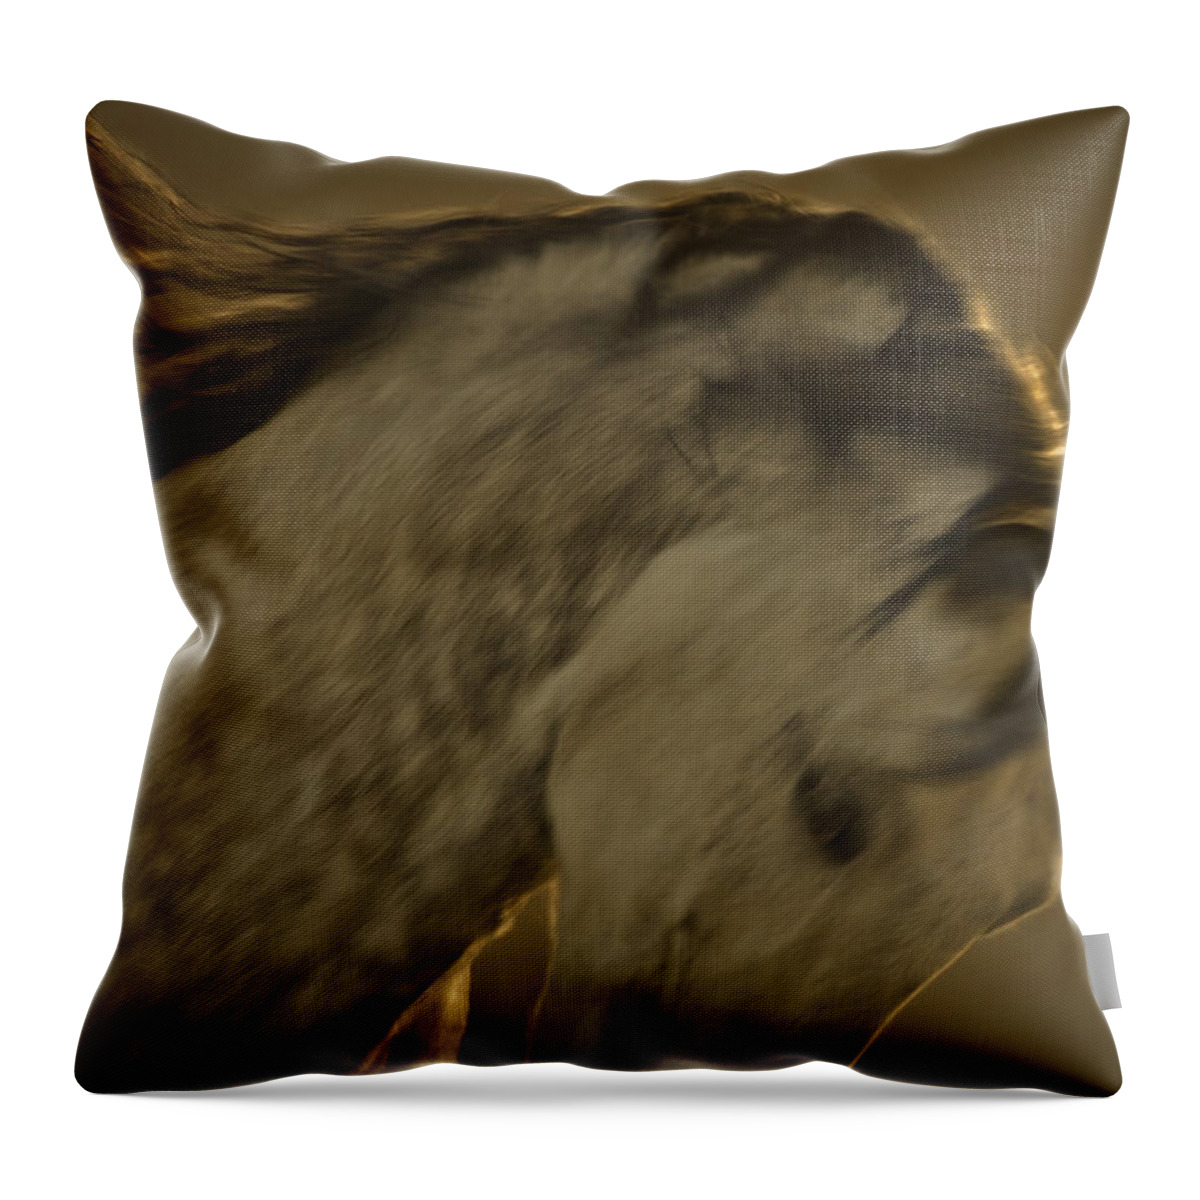 Andalusia Throw Pillow featuring the photograph Americano 2 by Catherine Sobredo